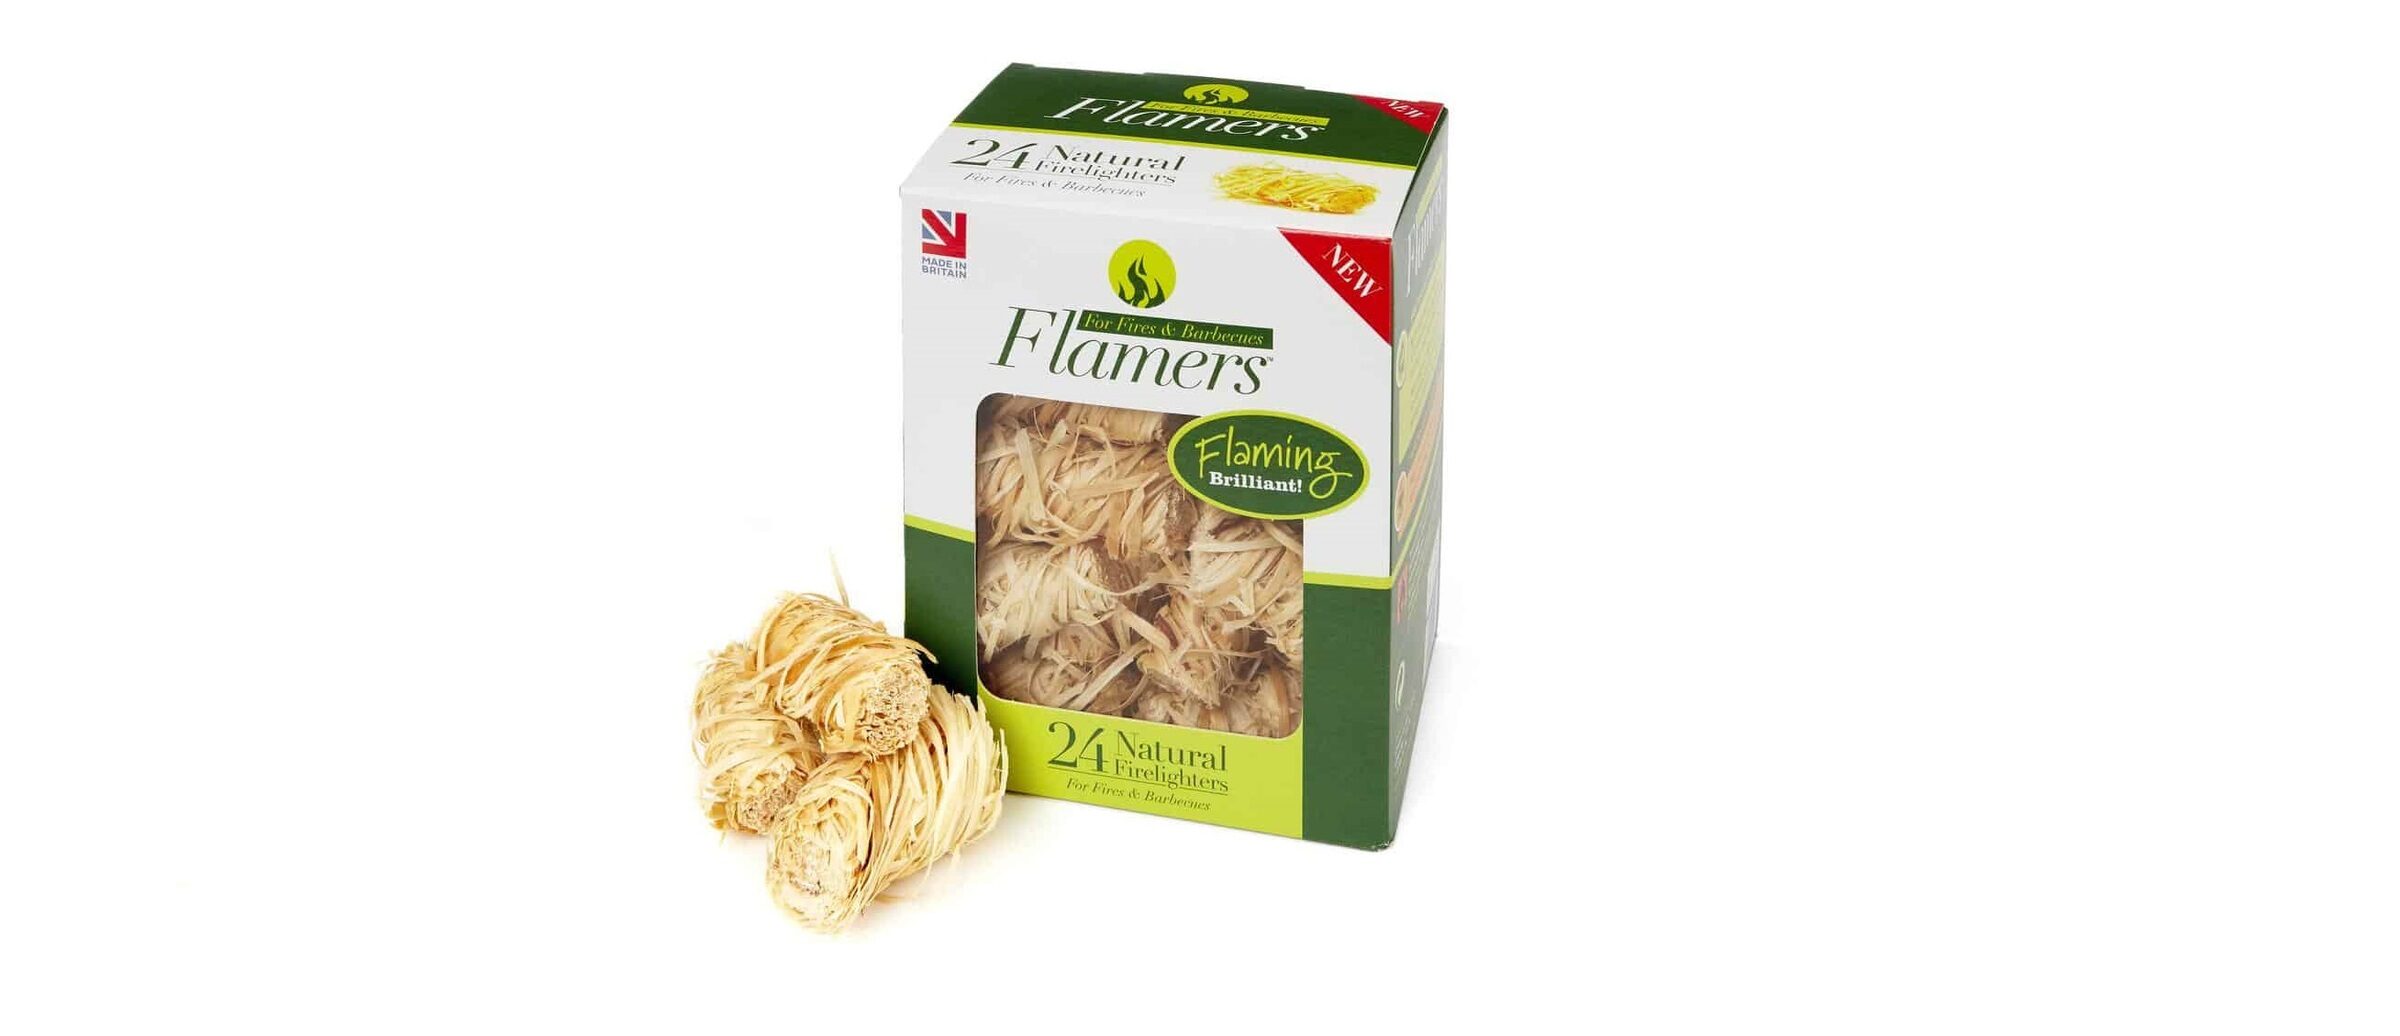 Flamers Natural Firelighters Box 24